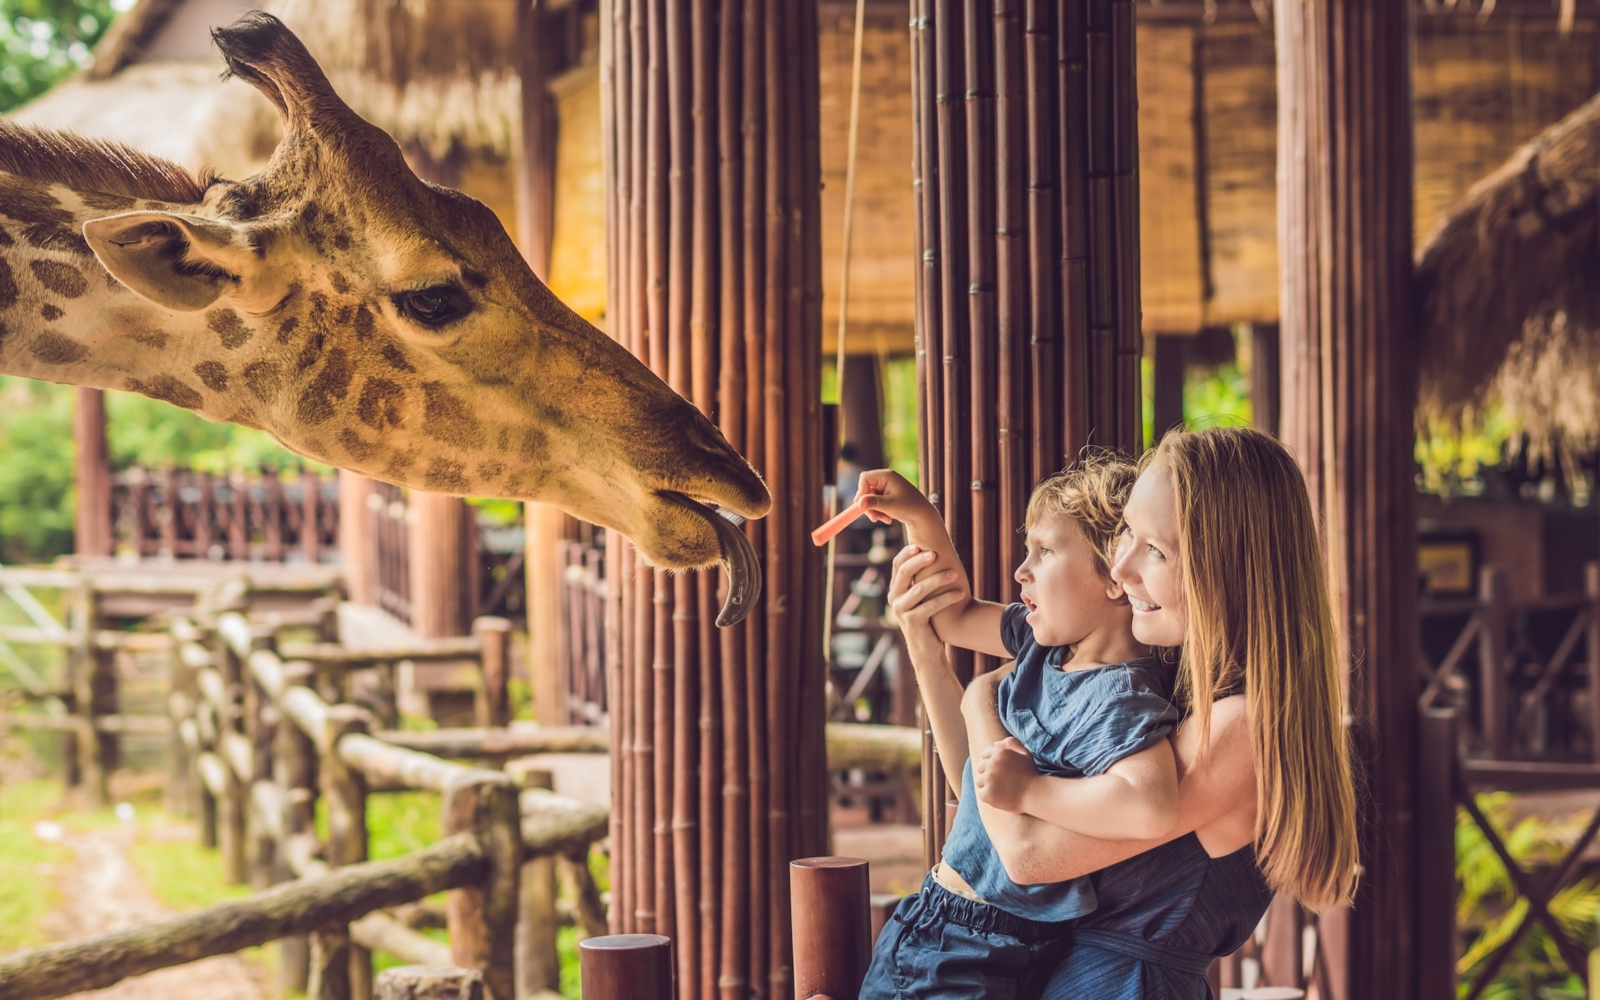 The 15 Best Zoos in the World in 2022